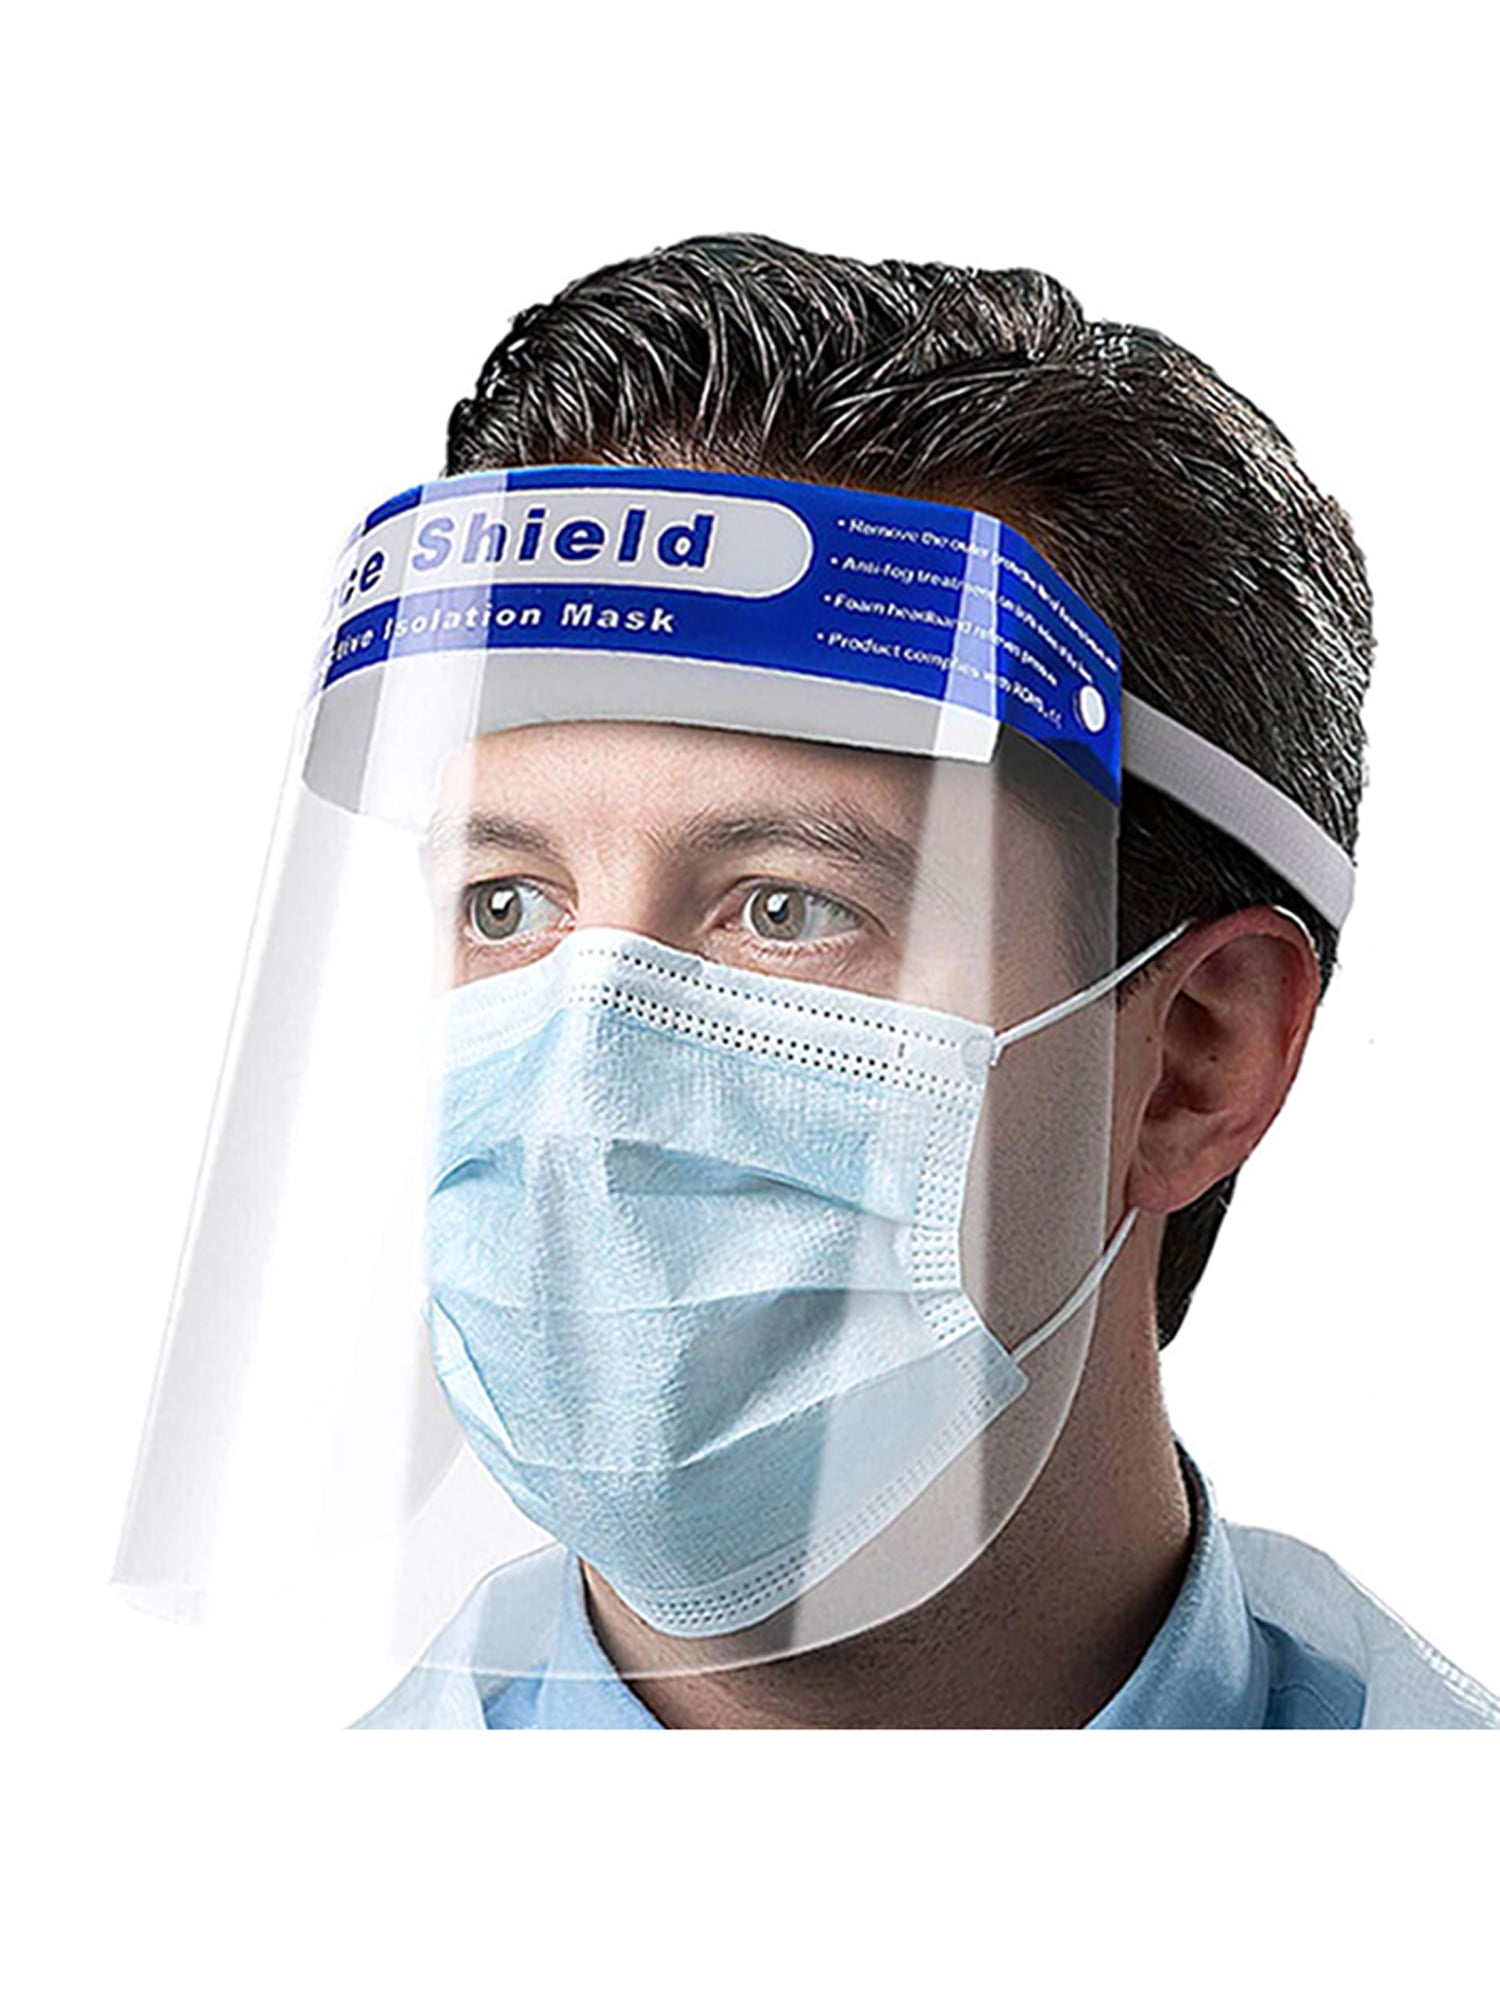 Details about   100 pcs Protection Guard mask Cover Anti-fog Washable Safety Full Face Shield 